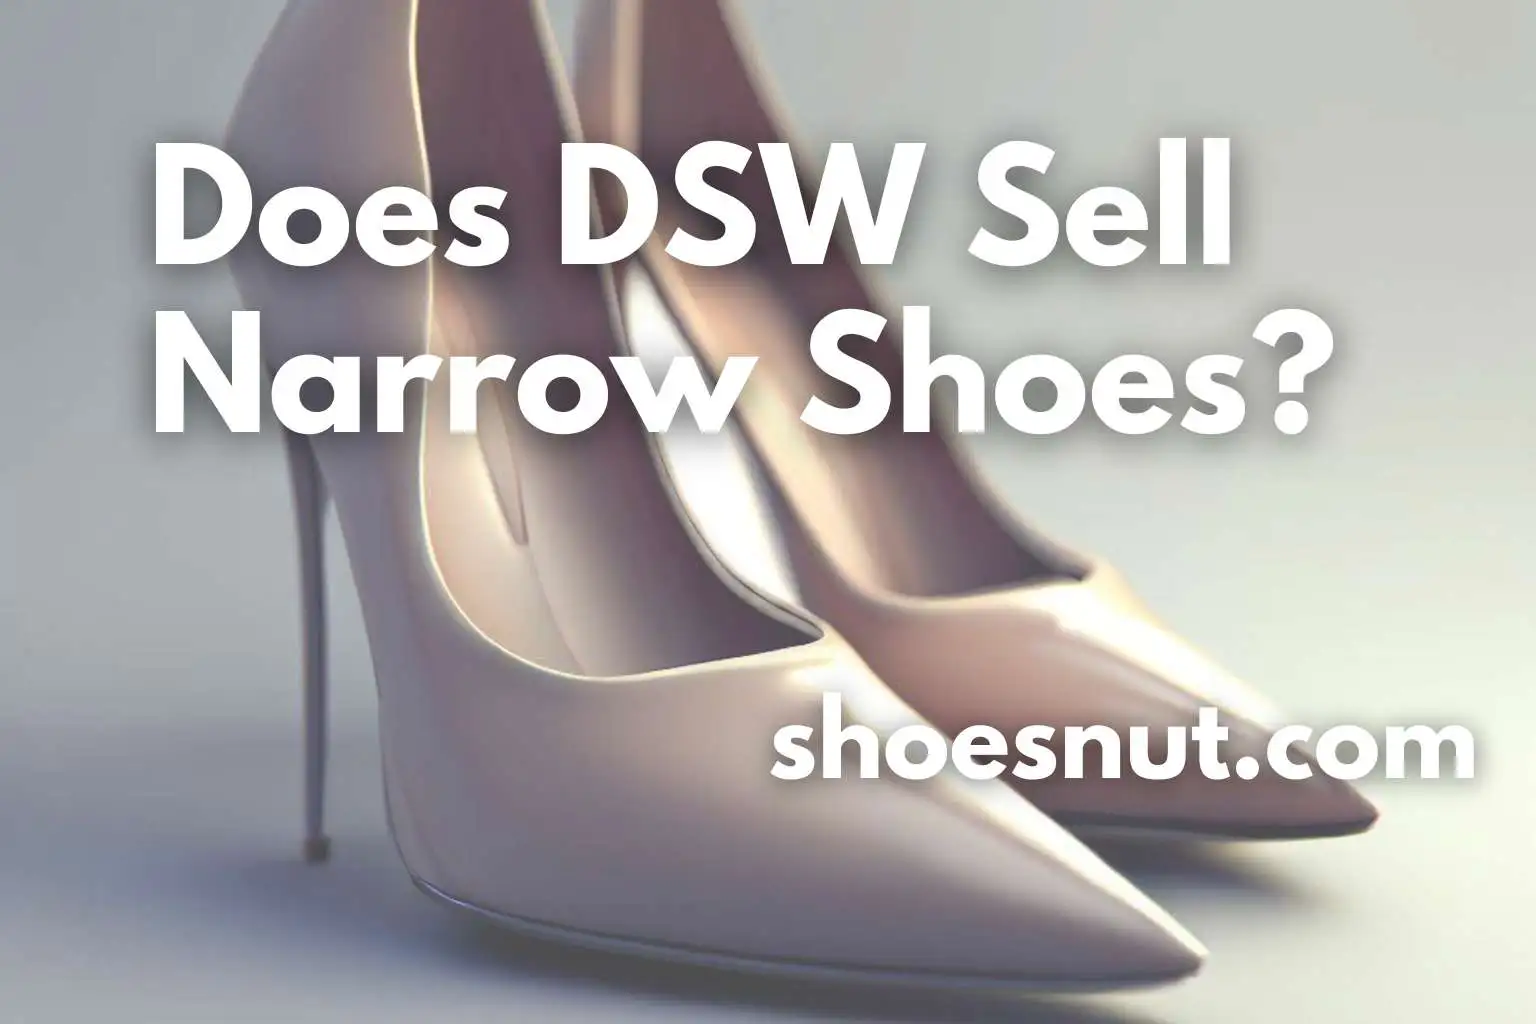 Does DSW Sell Narrow Shoes?